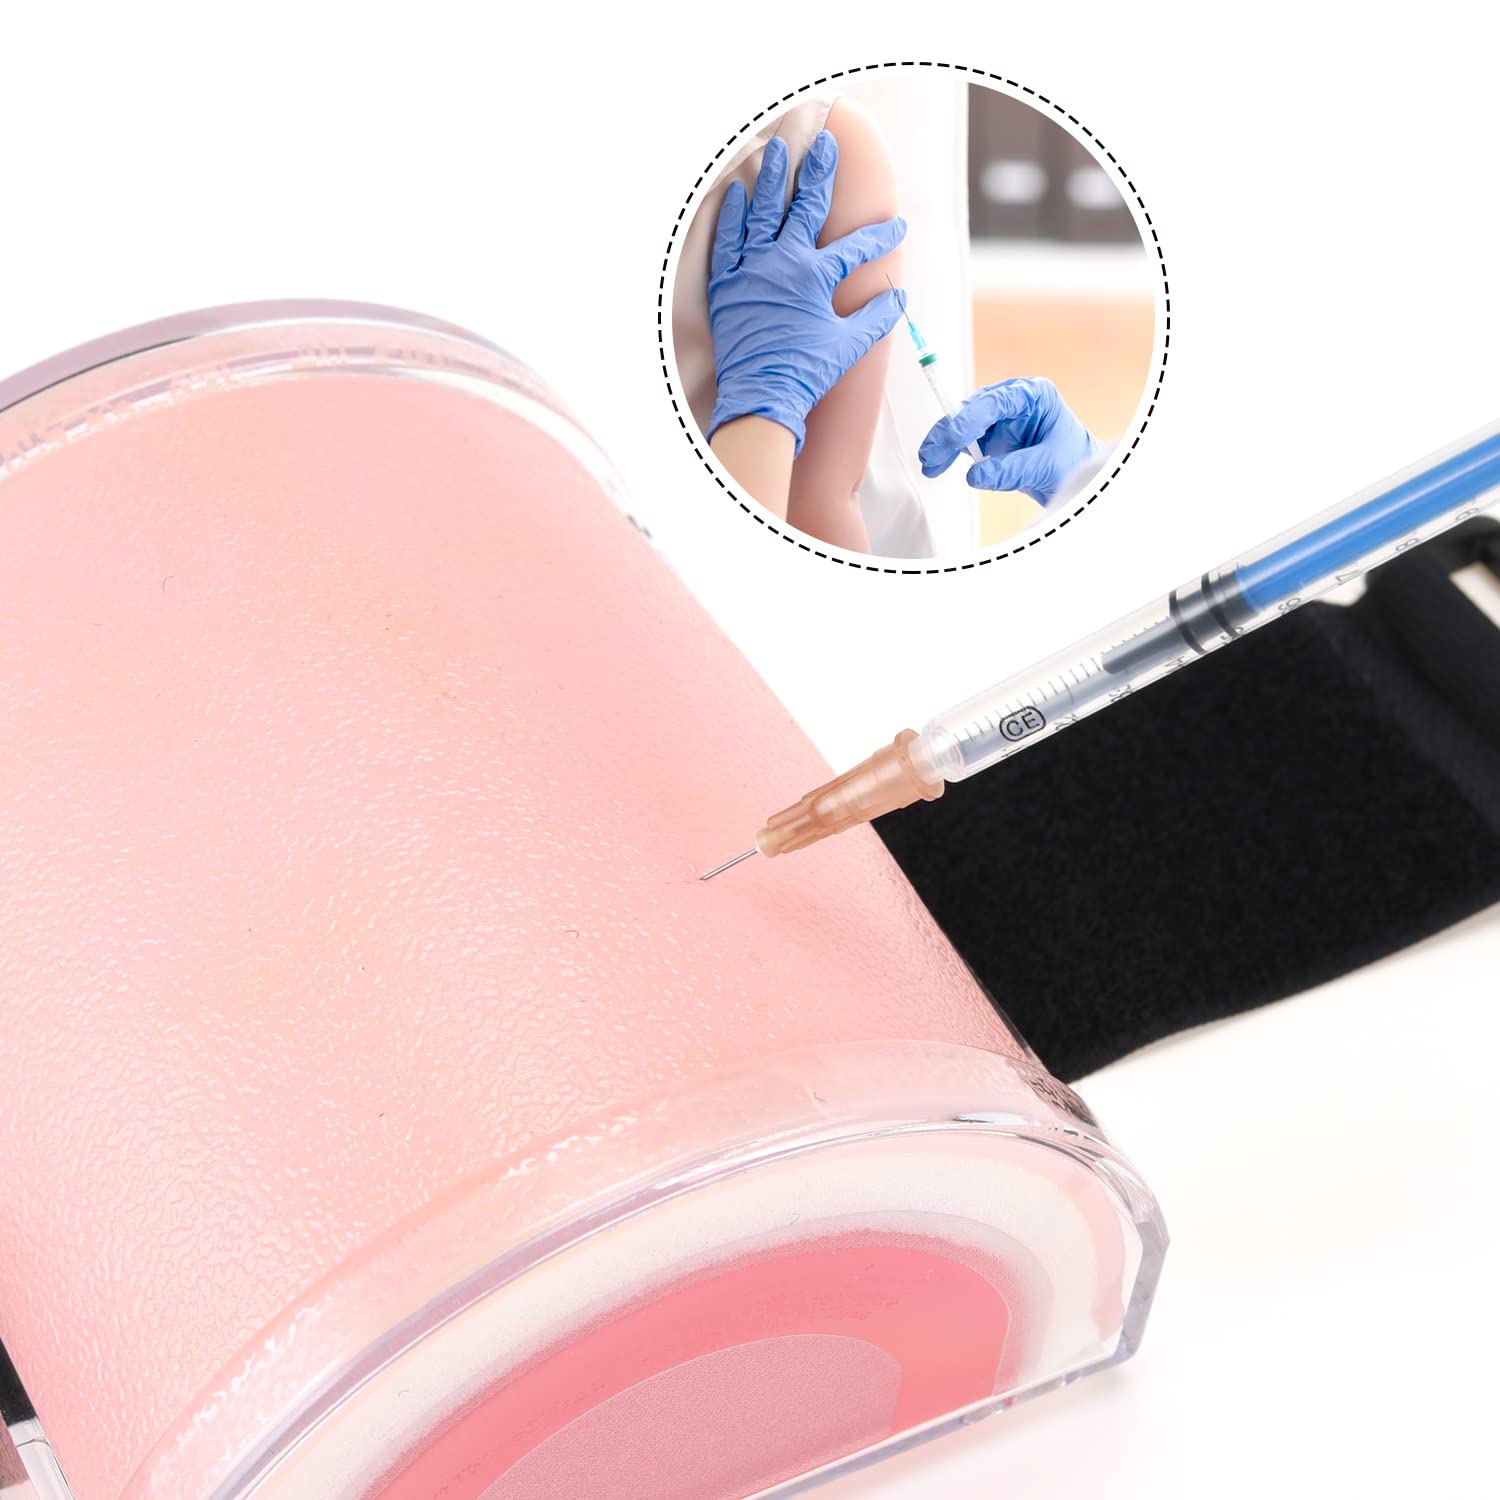 RONTEN Wearable Intramuscular Injection Training Pad Model Intradermal Subcutaneous Injection Training Tool